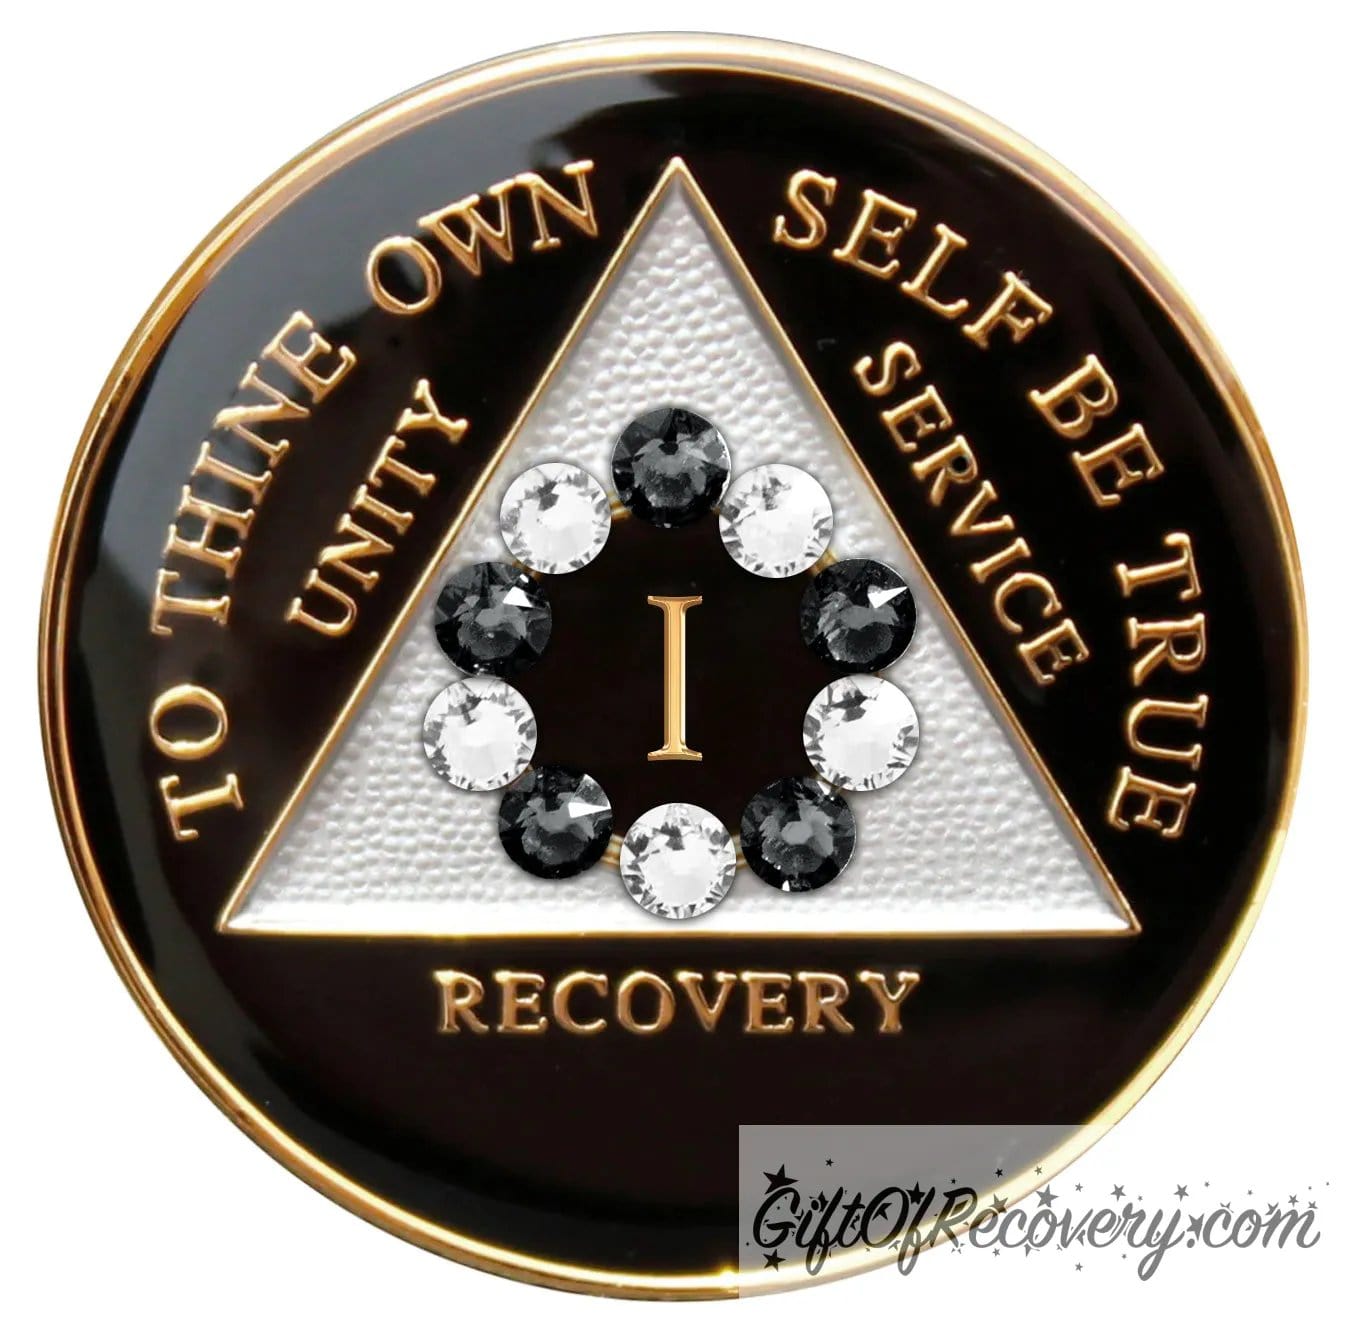 1 Year Black Onyx 10th Step recovery medallion with AA symbol and lettering in 14k gold, genuine crystals, emphasizing action and reflection.